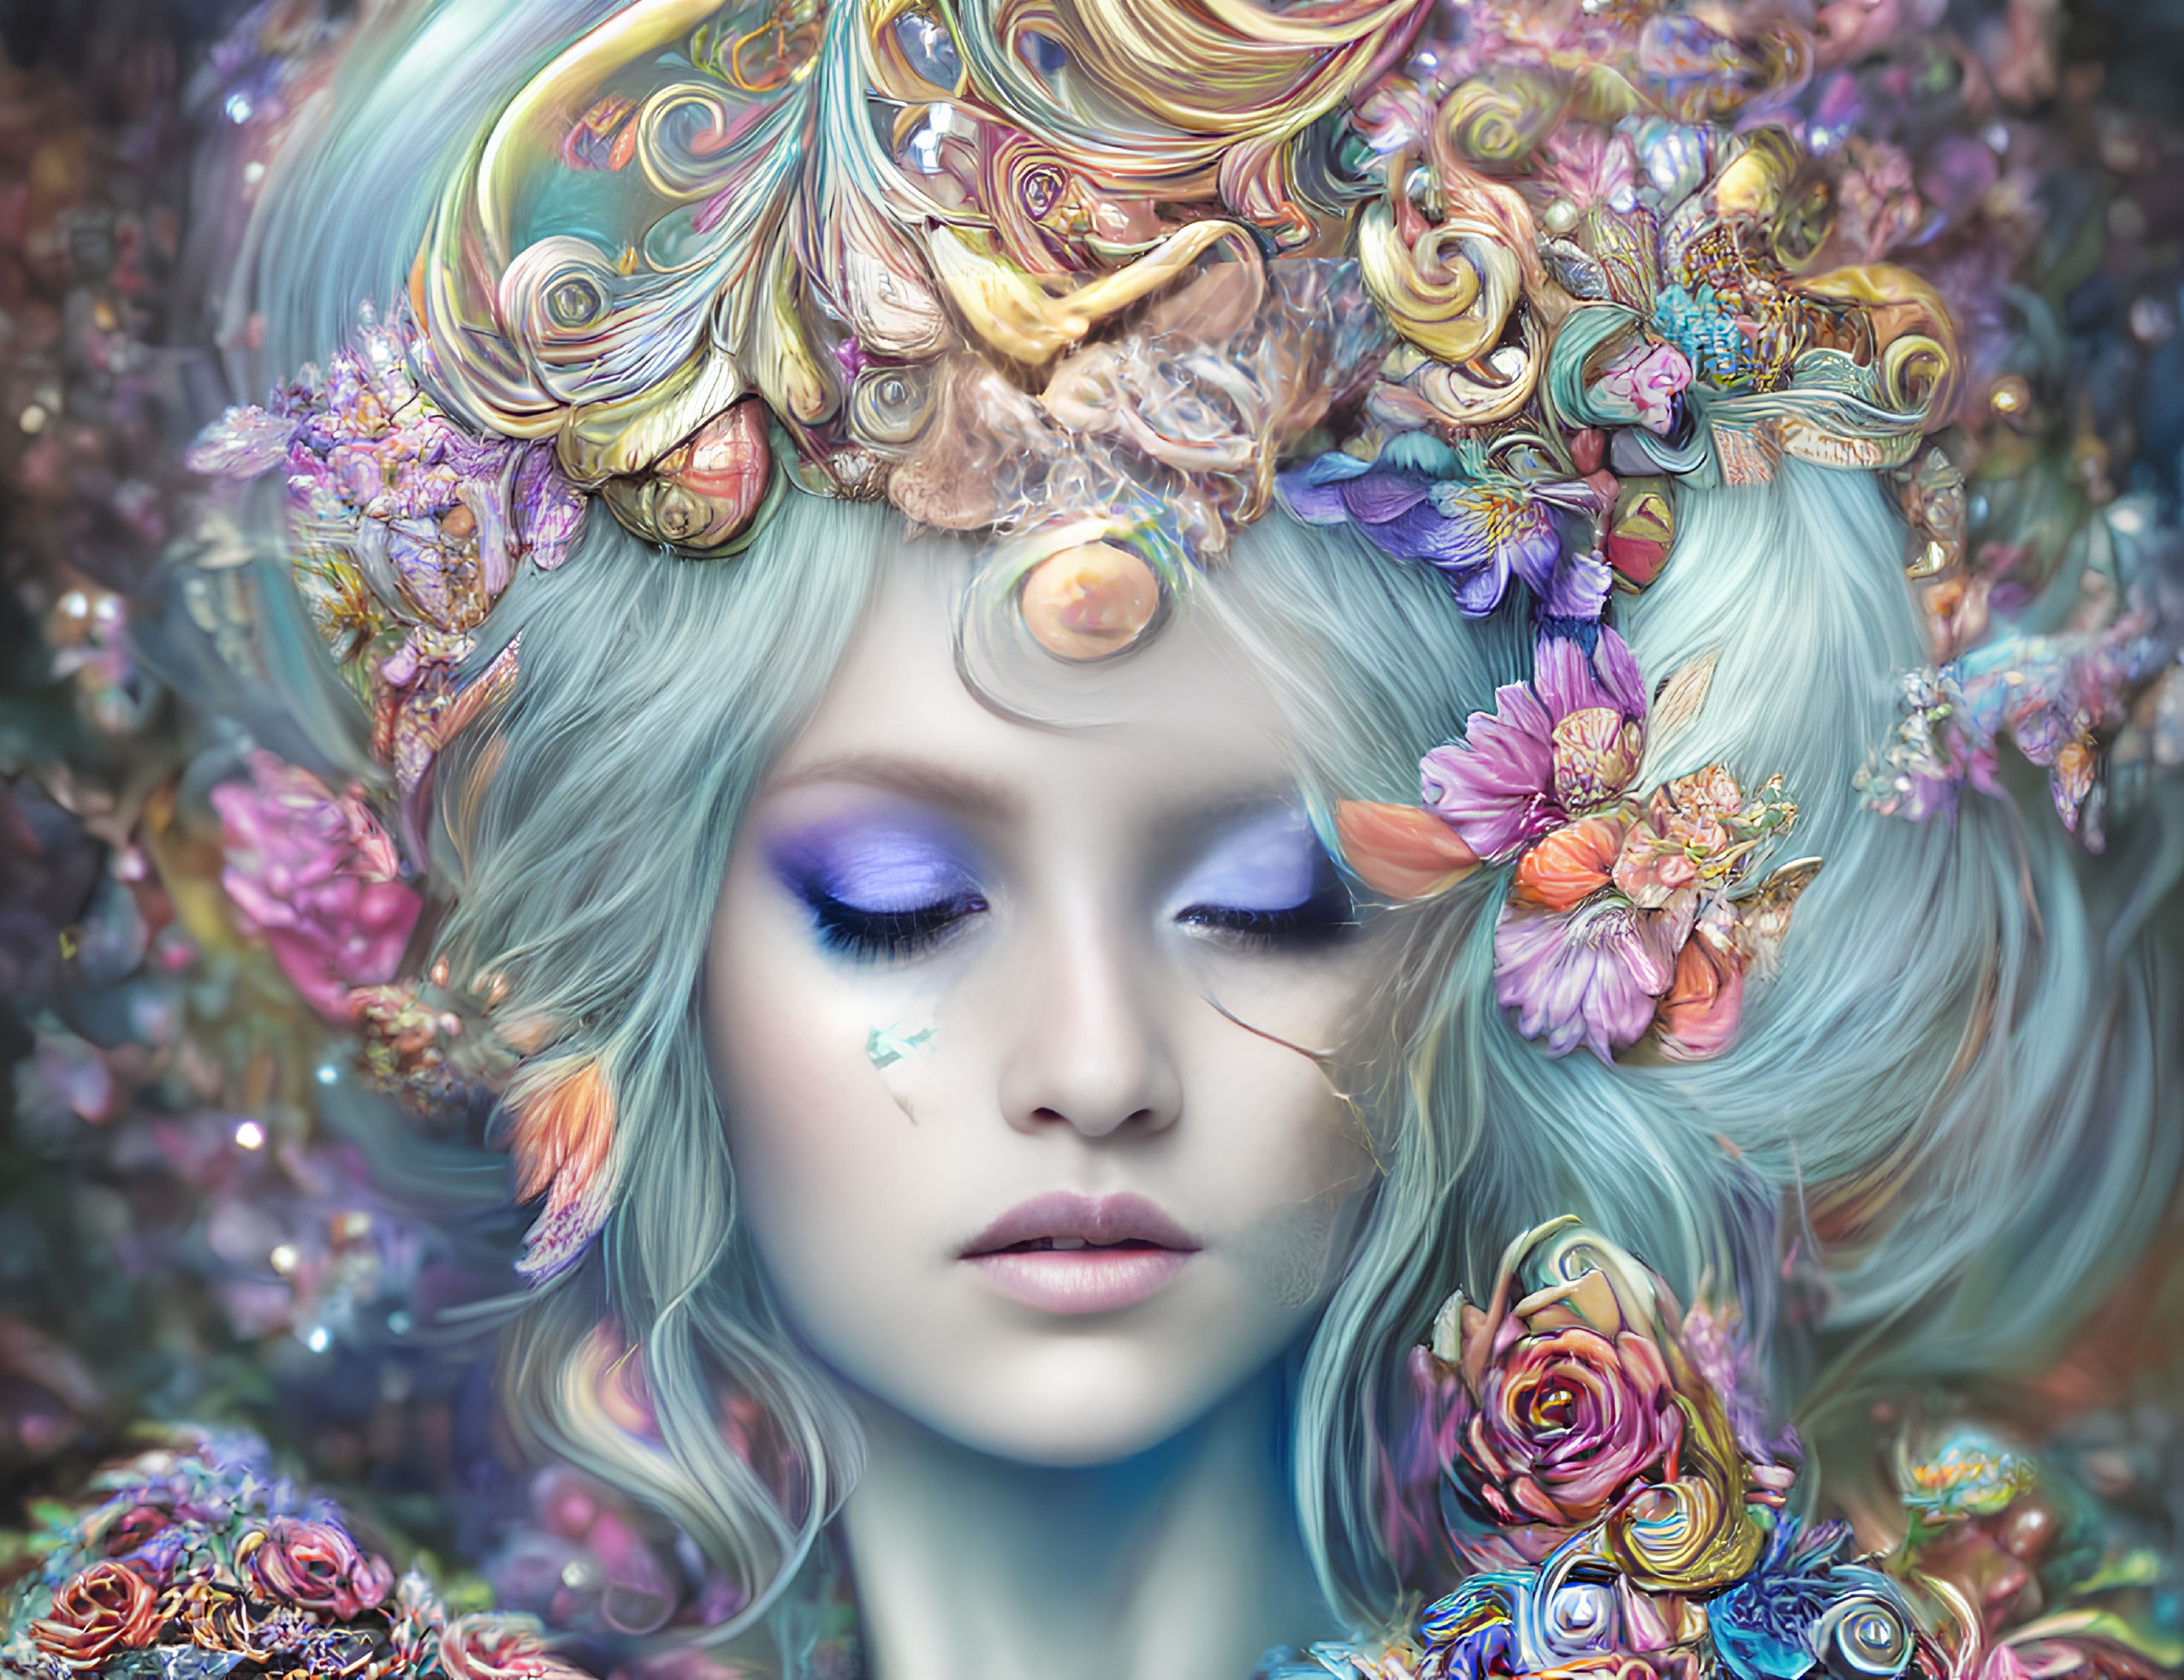 Fantasy female portrait with blue hair and golden headpiece among colorful florals